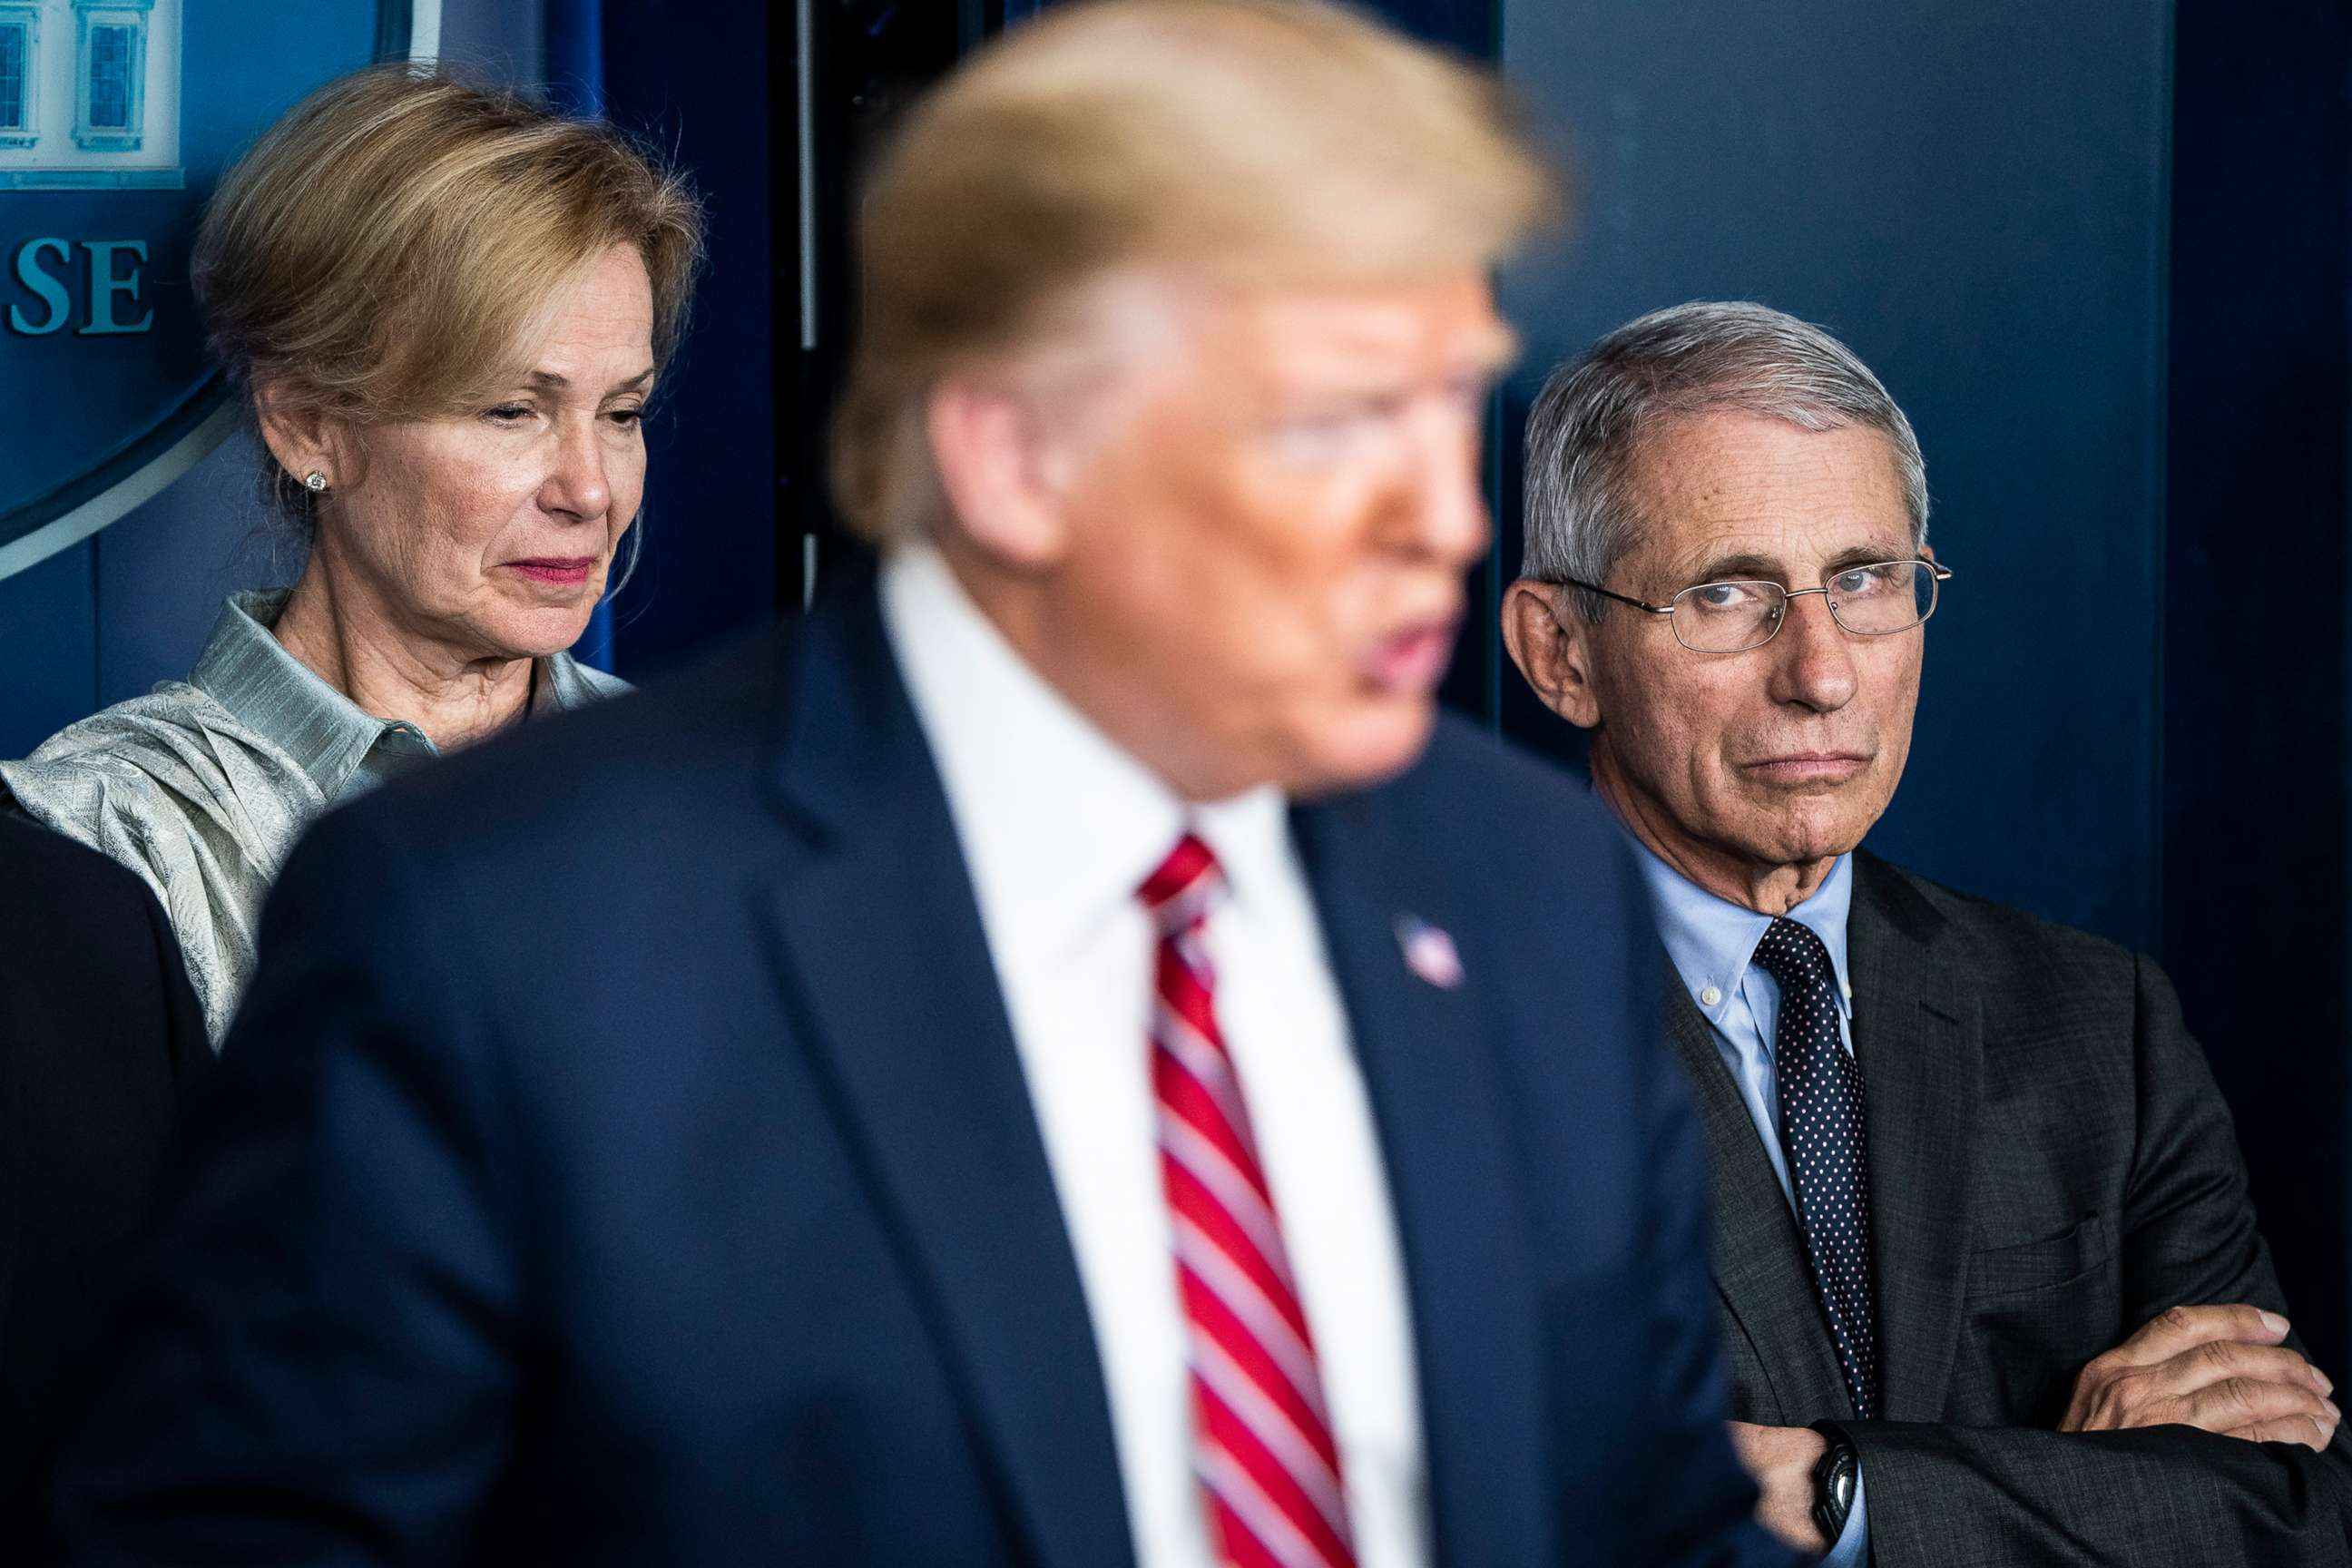 PHOTO: Dr. Anthony Fauci, right, listens as President Donald J. Trump speaks during a news conference at the White House, March 20, 2020 in Washington.